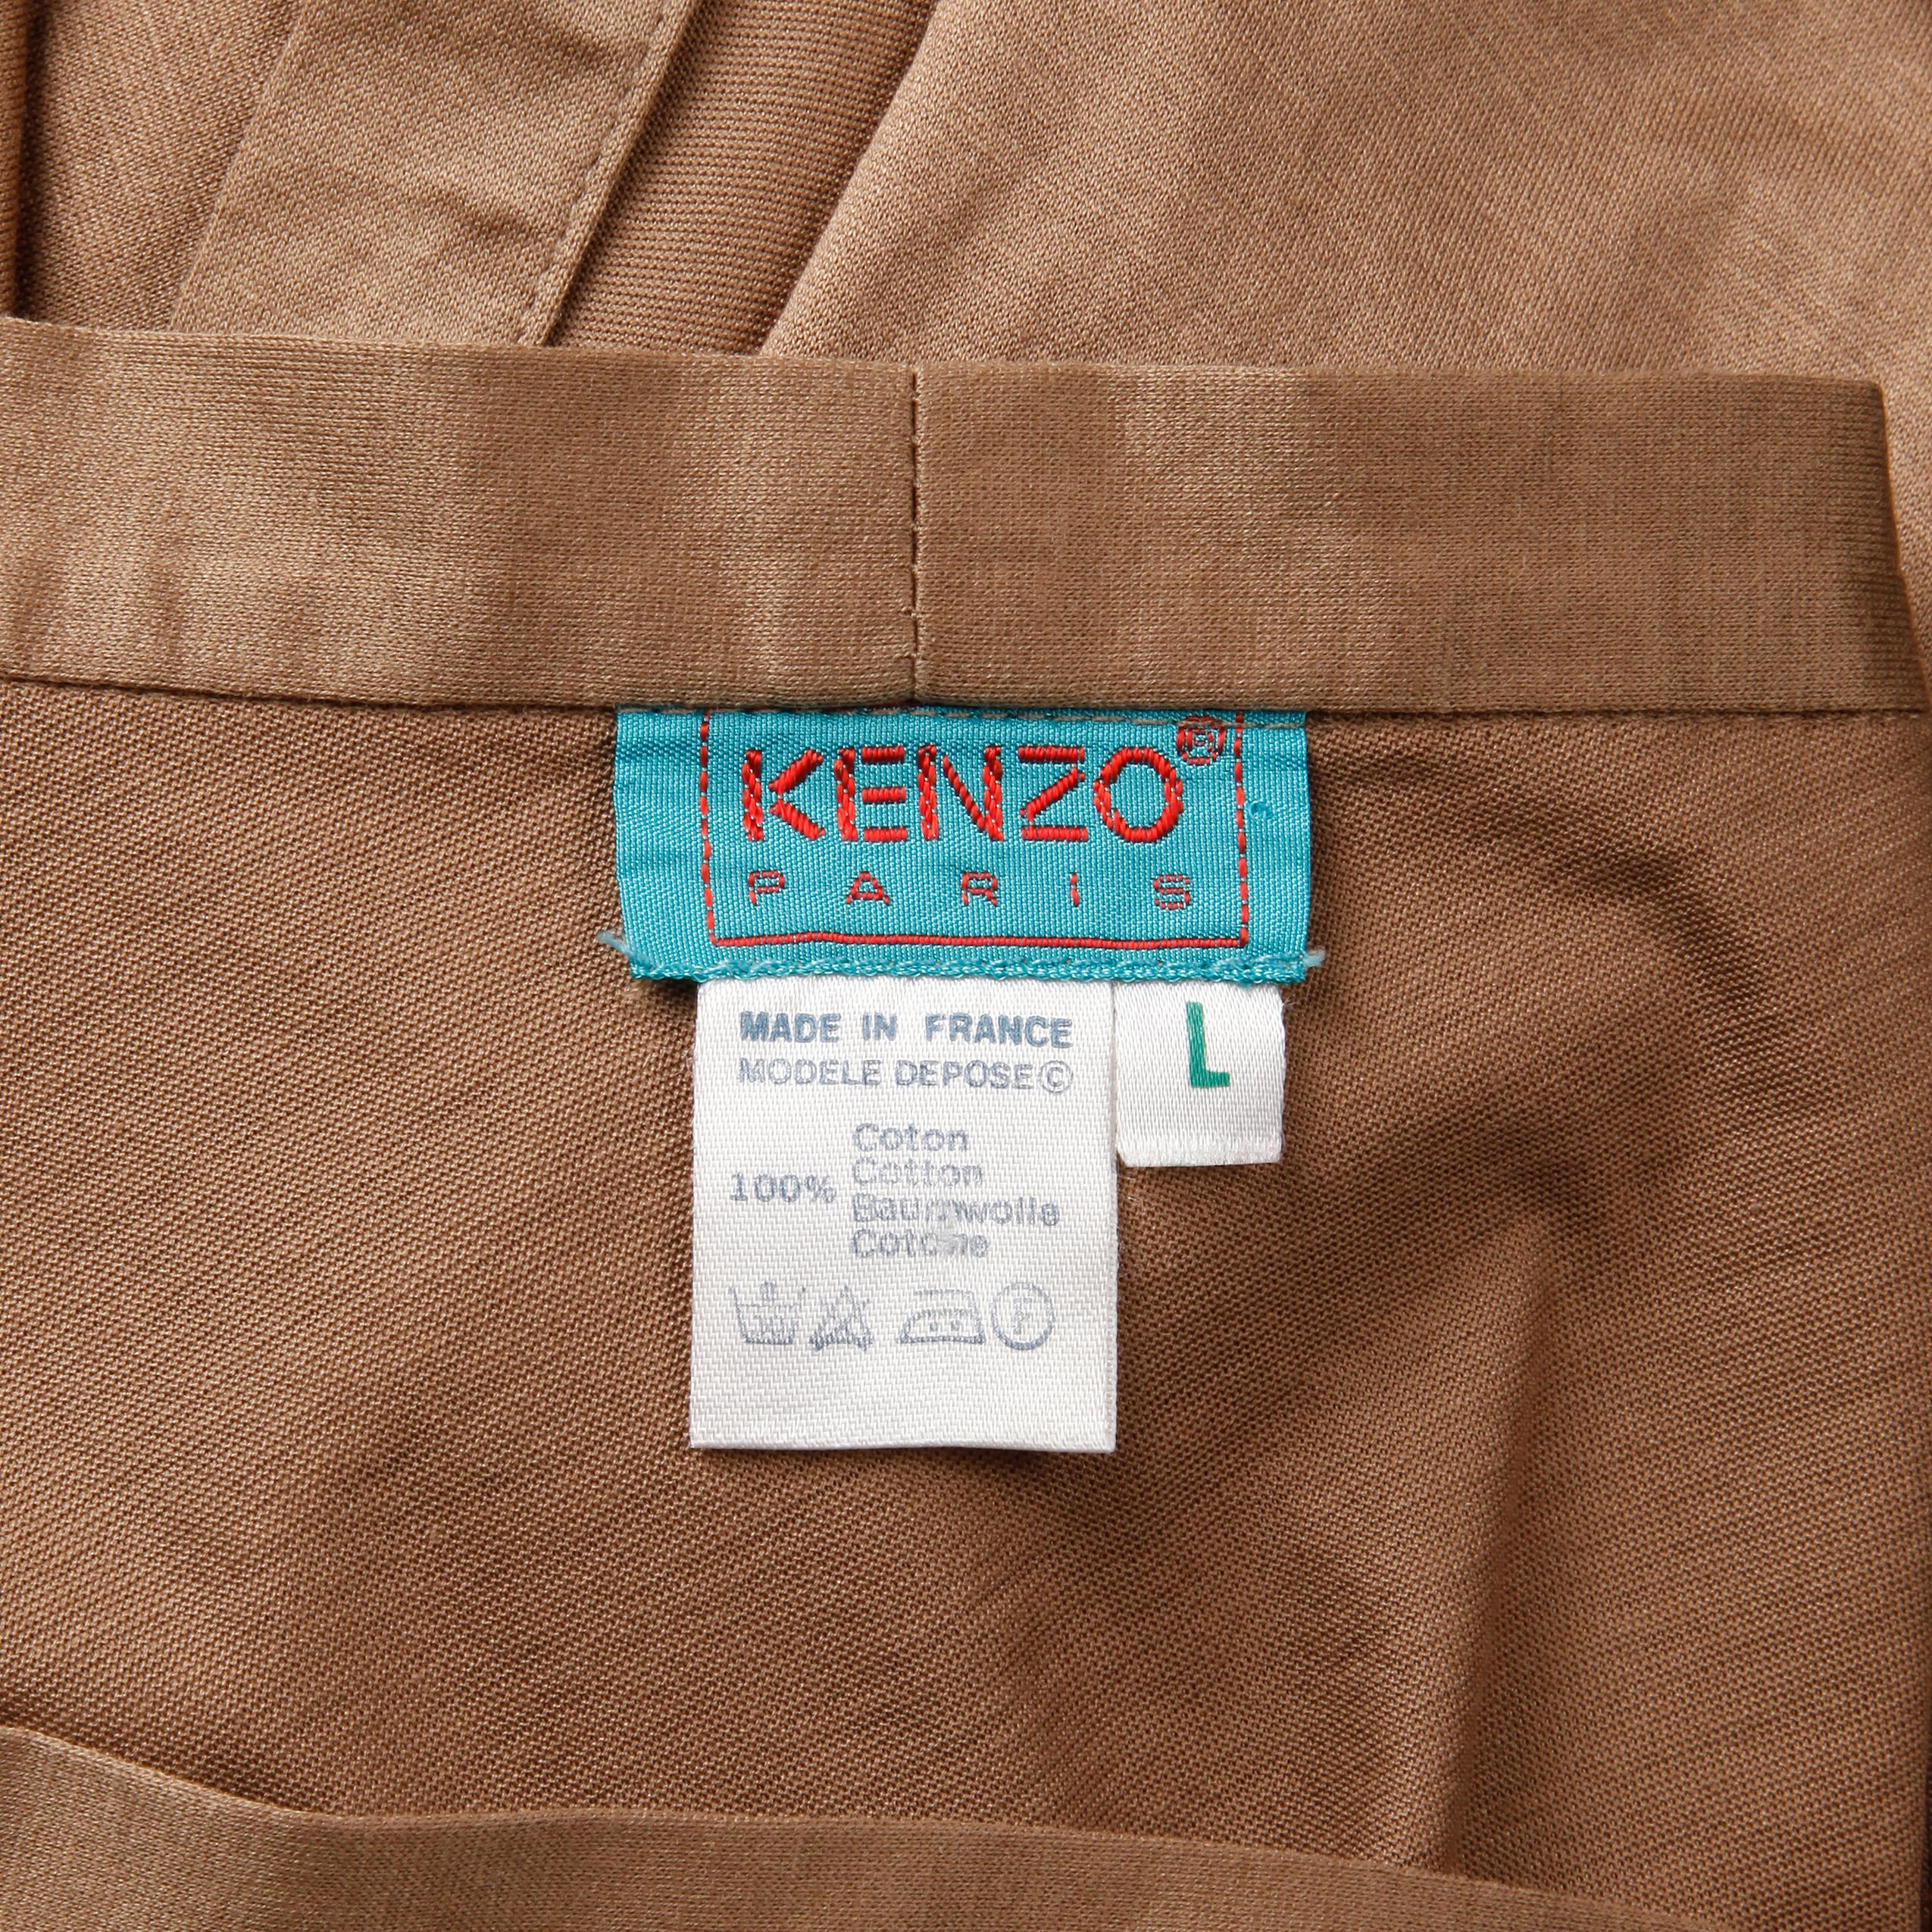 Versatile light weight vintage taupe brown cotton wrap skirt by Kenzo Paris. Unlined with wrap tie closure. The marked size is Large. 100% cotton. The marked size is large, but the skirt will also likely fit sizes small-medium on account of the